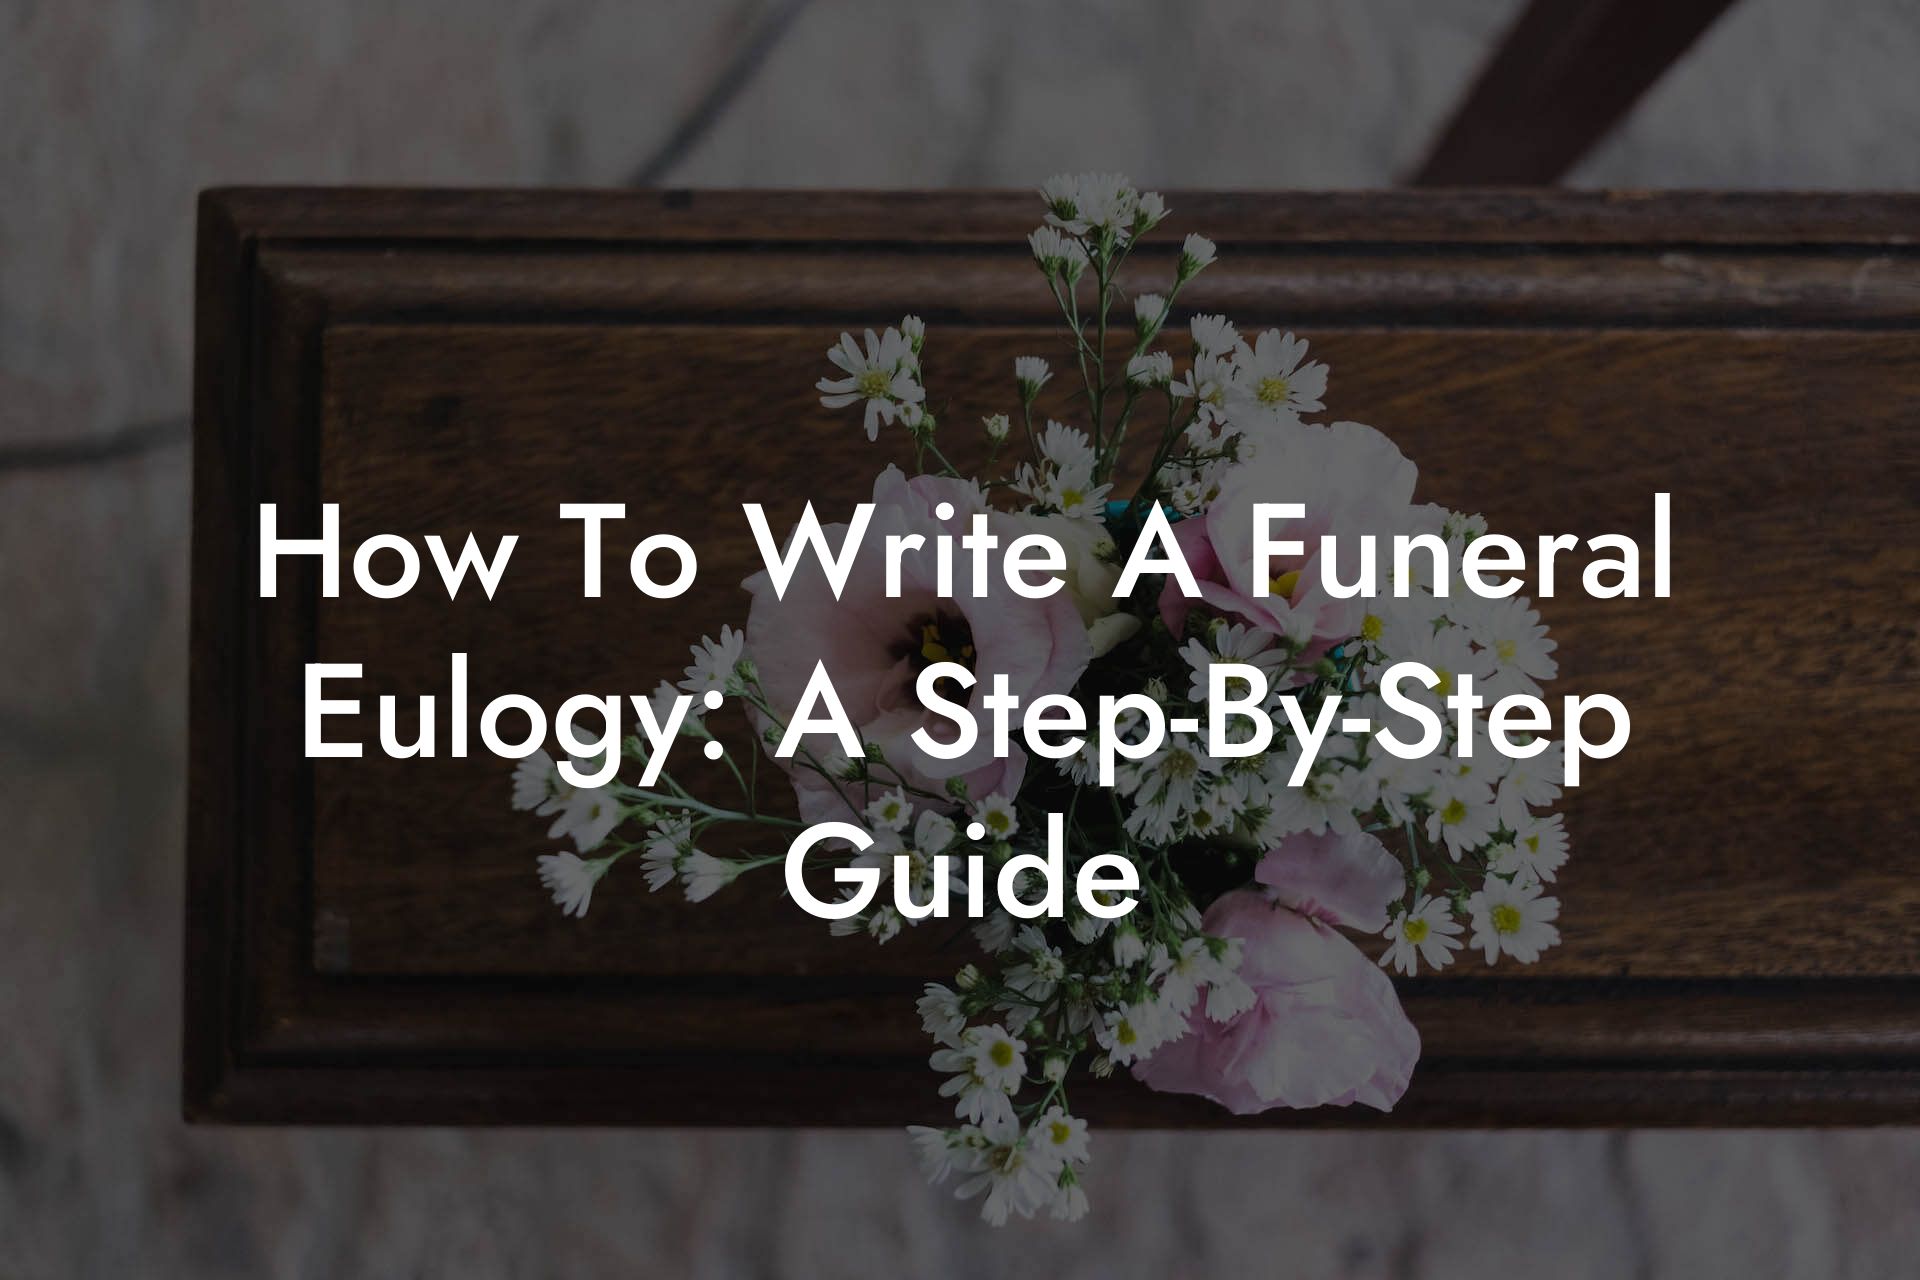 How To Write A Funeral Eulogy: A Step-By-Step Guide